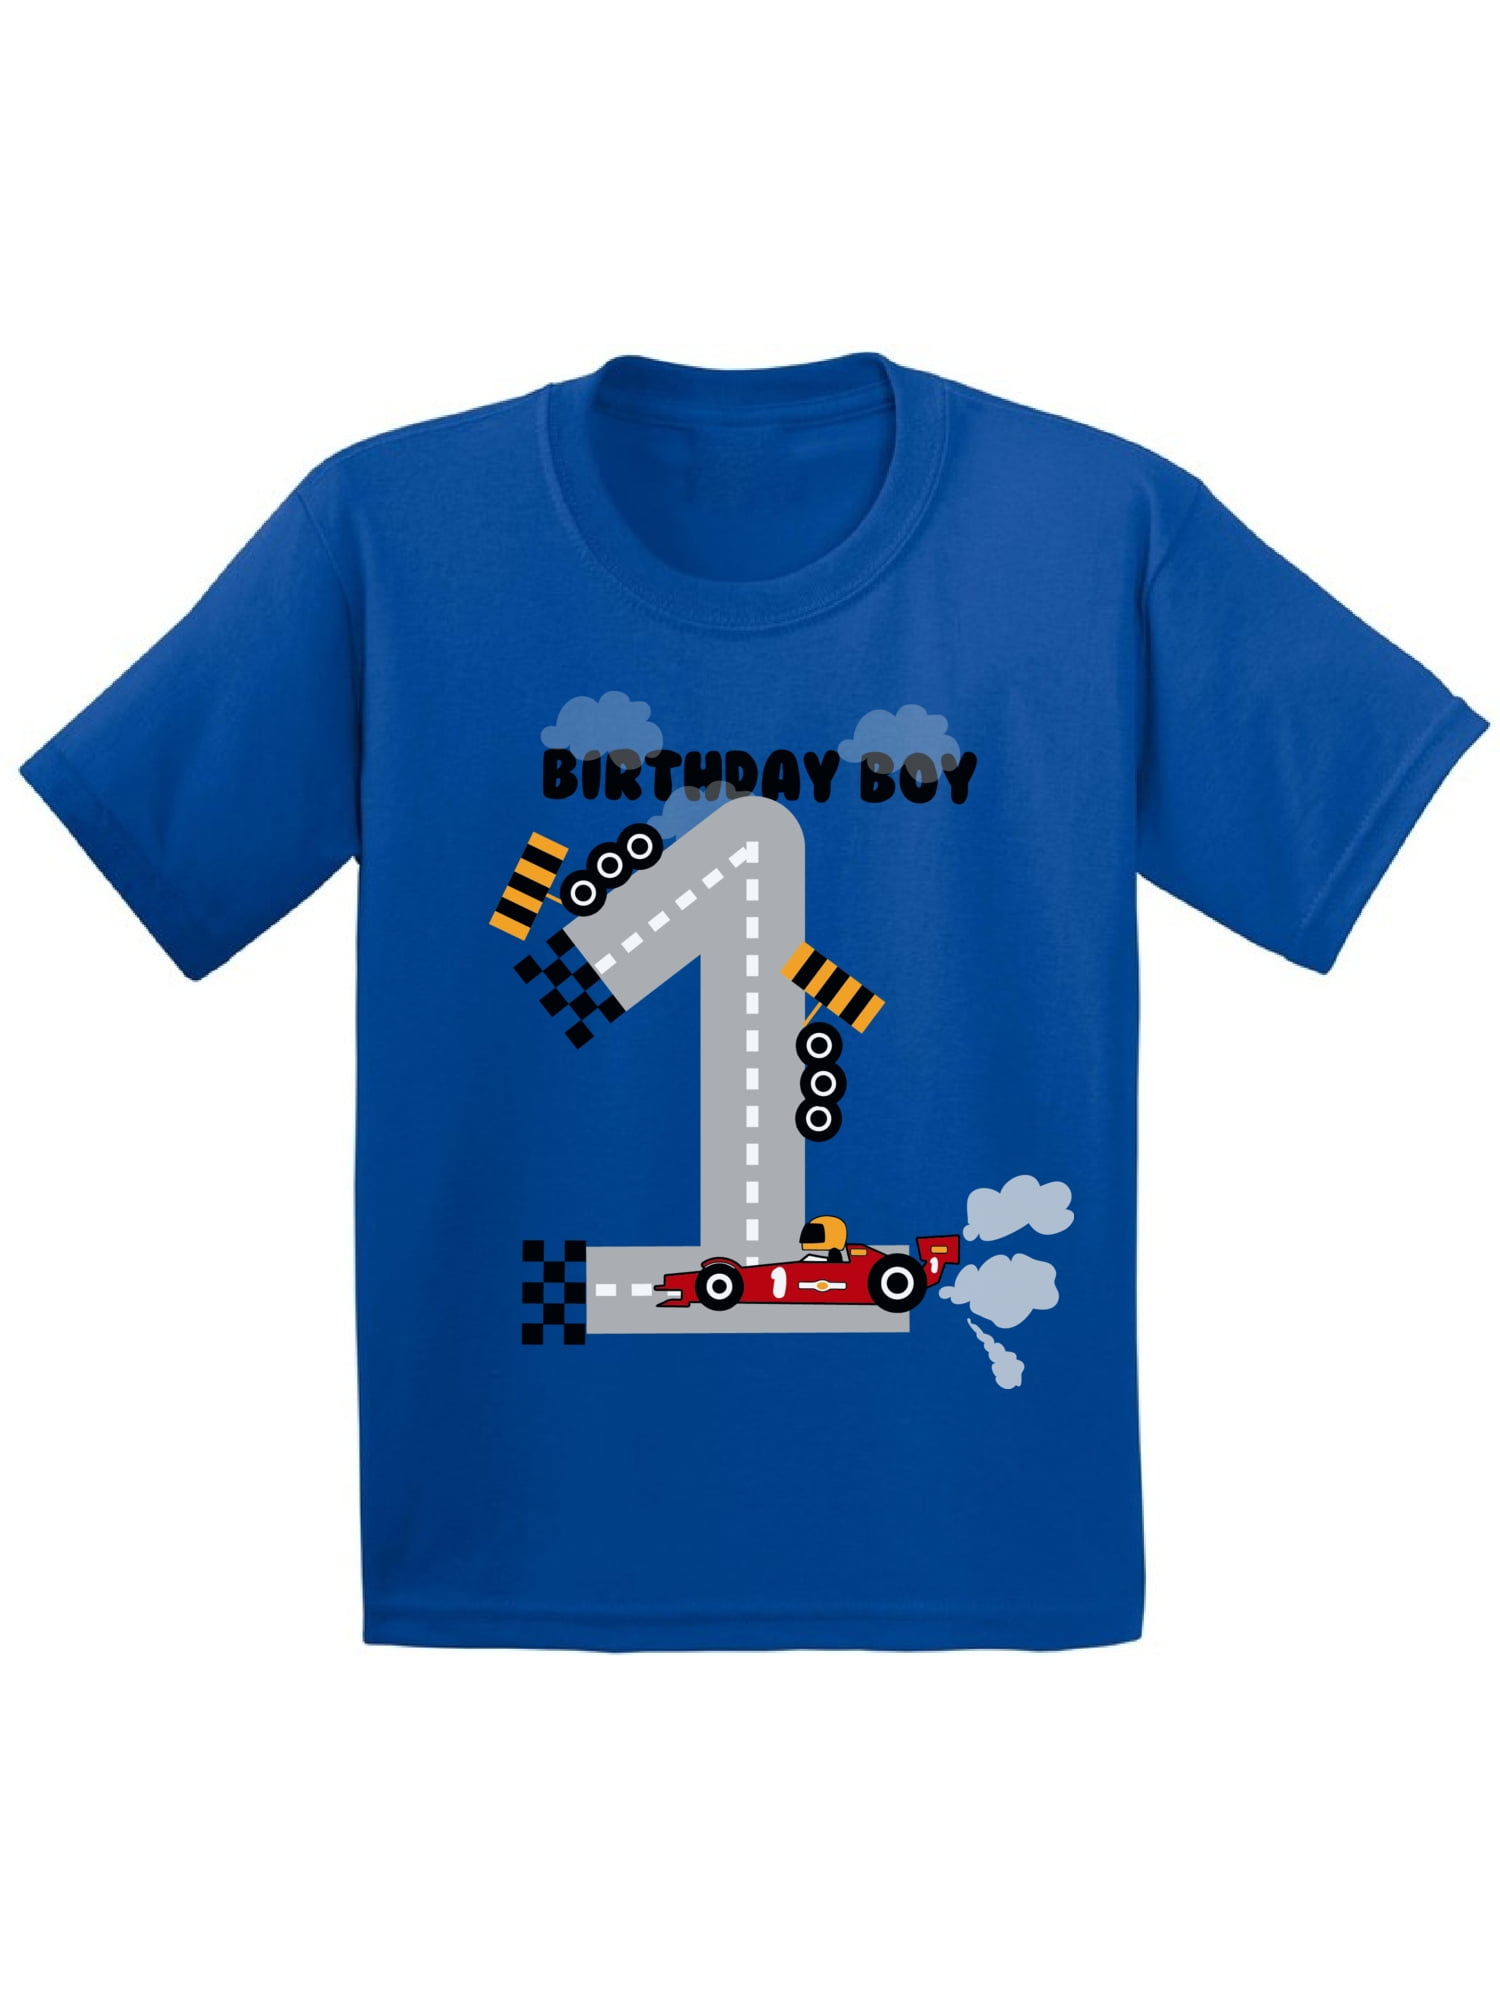 first birthday t shirt for baby boy